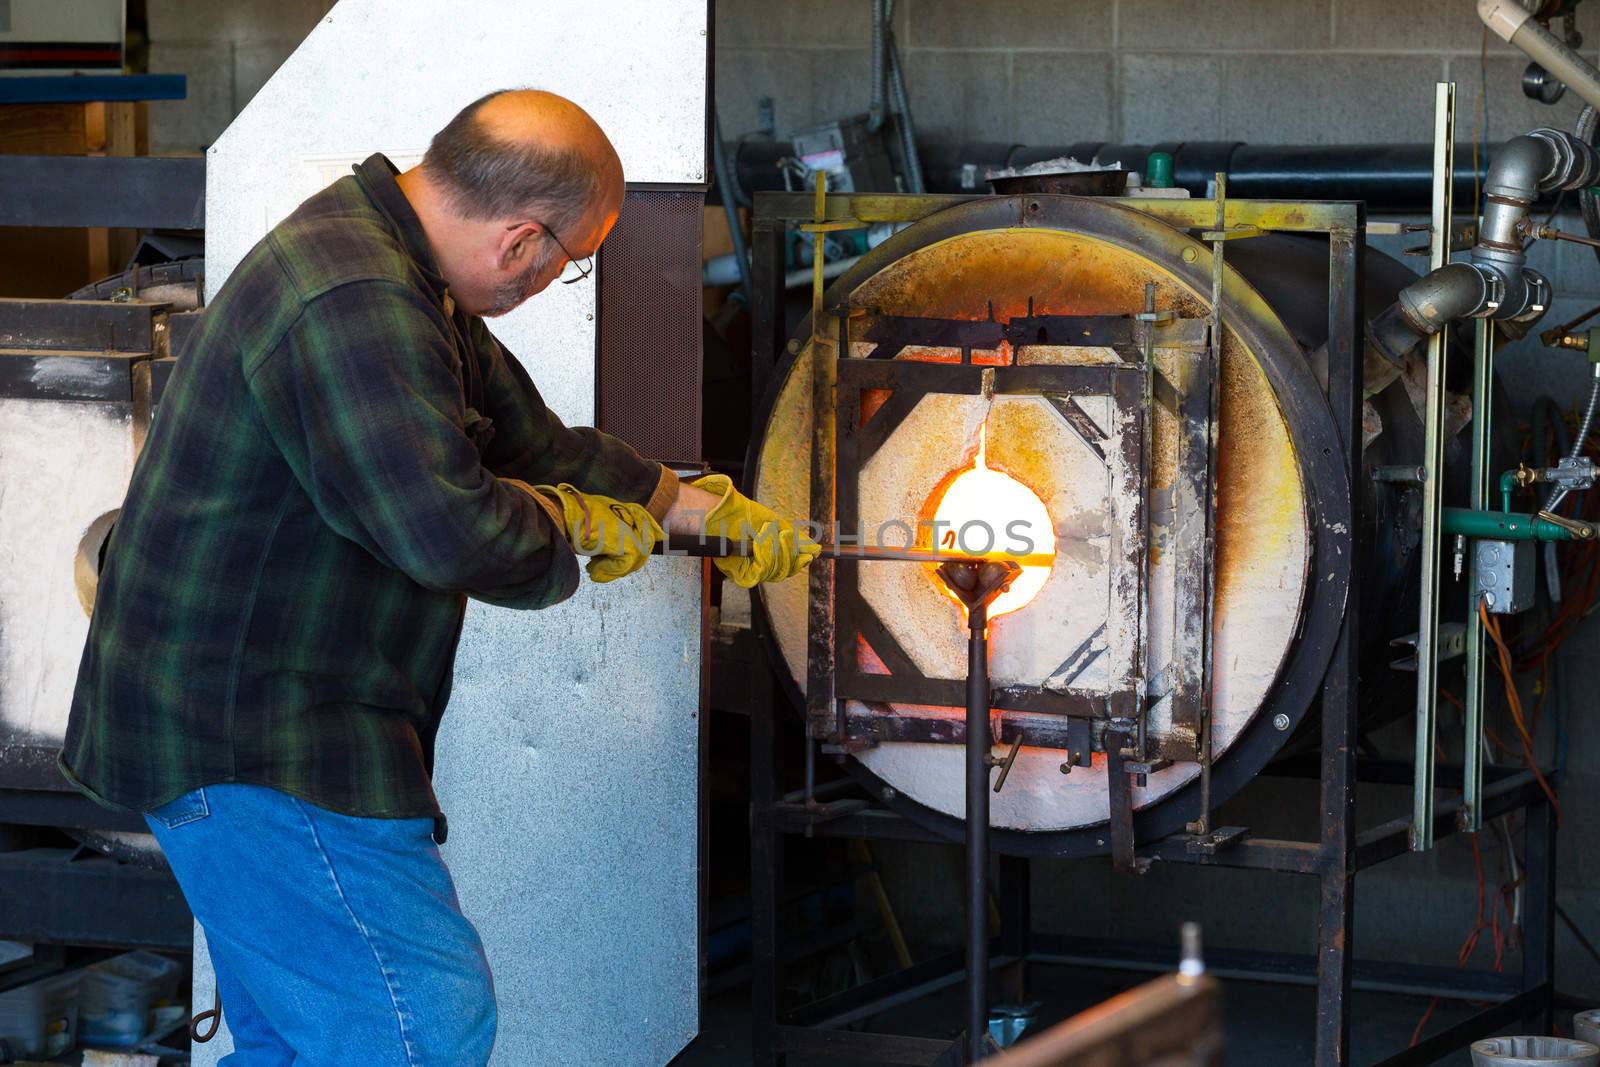 A man fires up his glass while glassblowing using a furnace that is extremely hot.